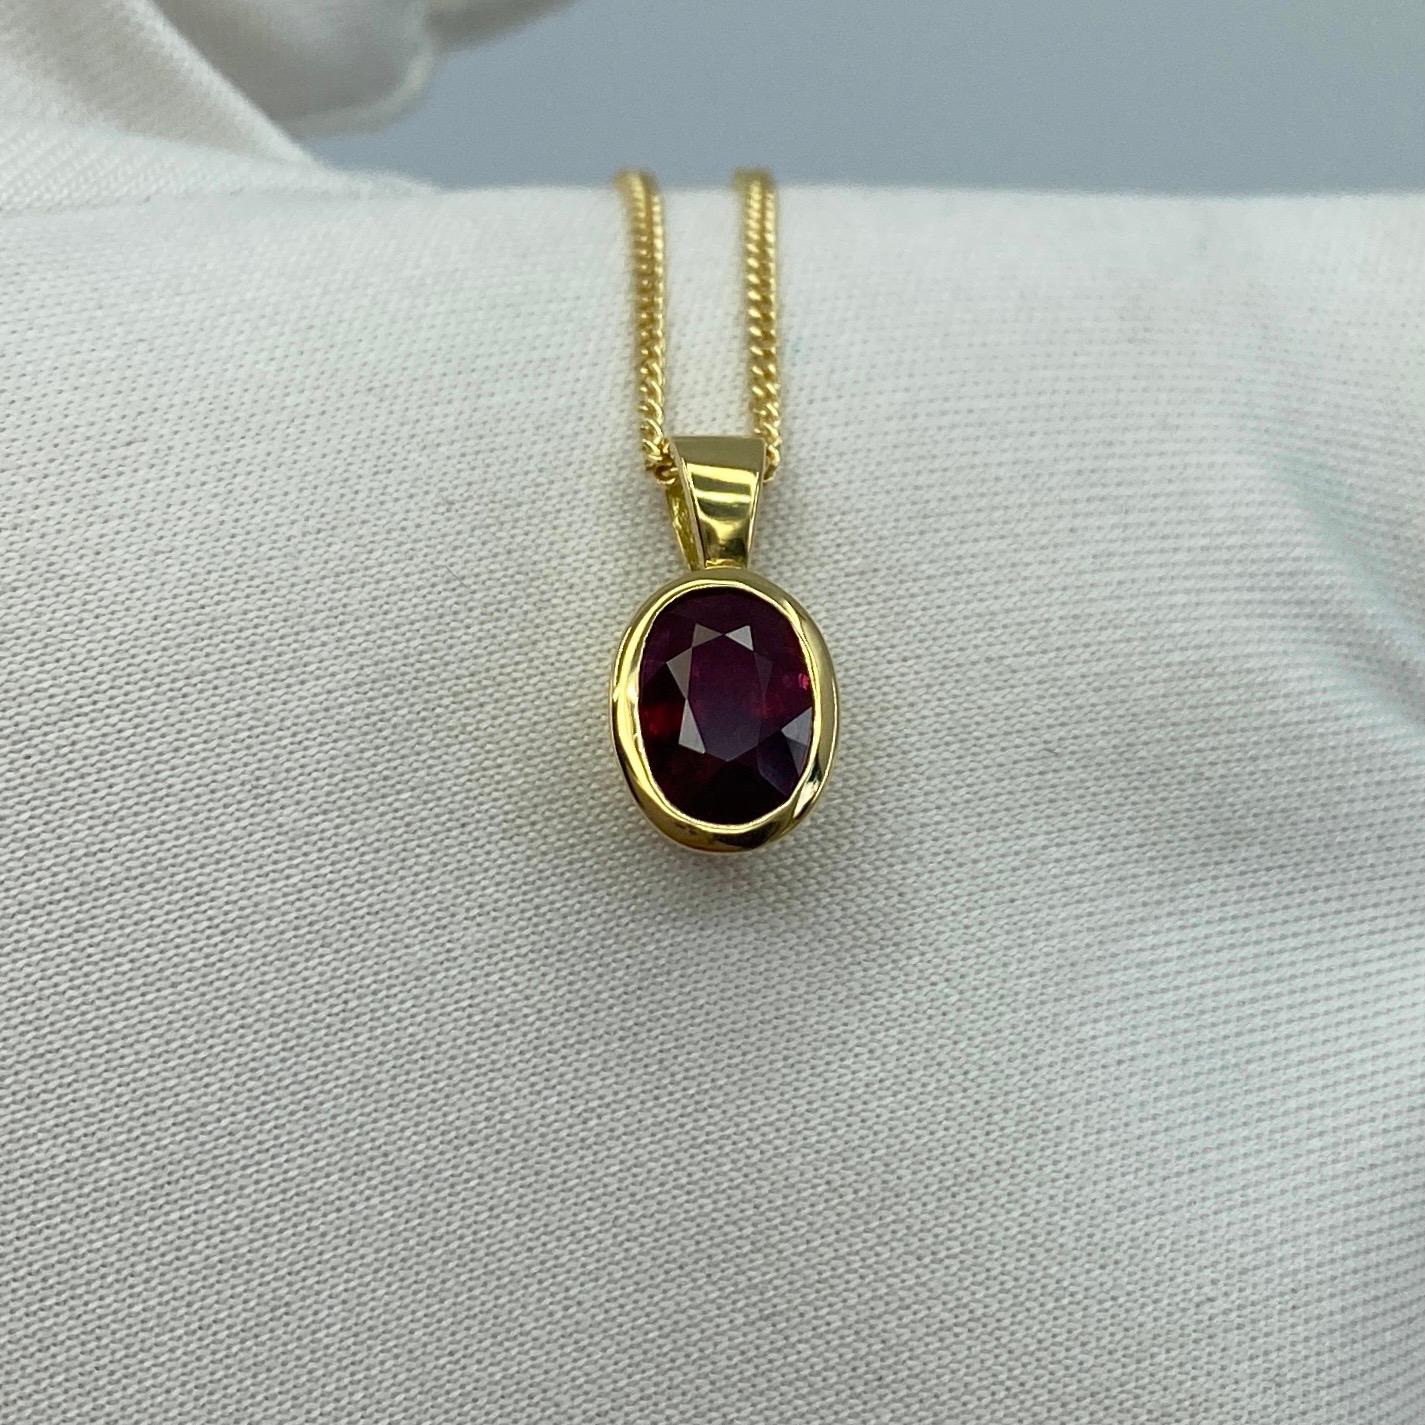 Women's or Men's Fine Deep Red Ruby 1.17ct Oval Cut 18k Yellow Gold Solitaire Pendant Necklace